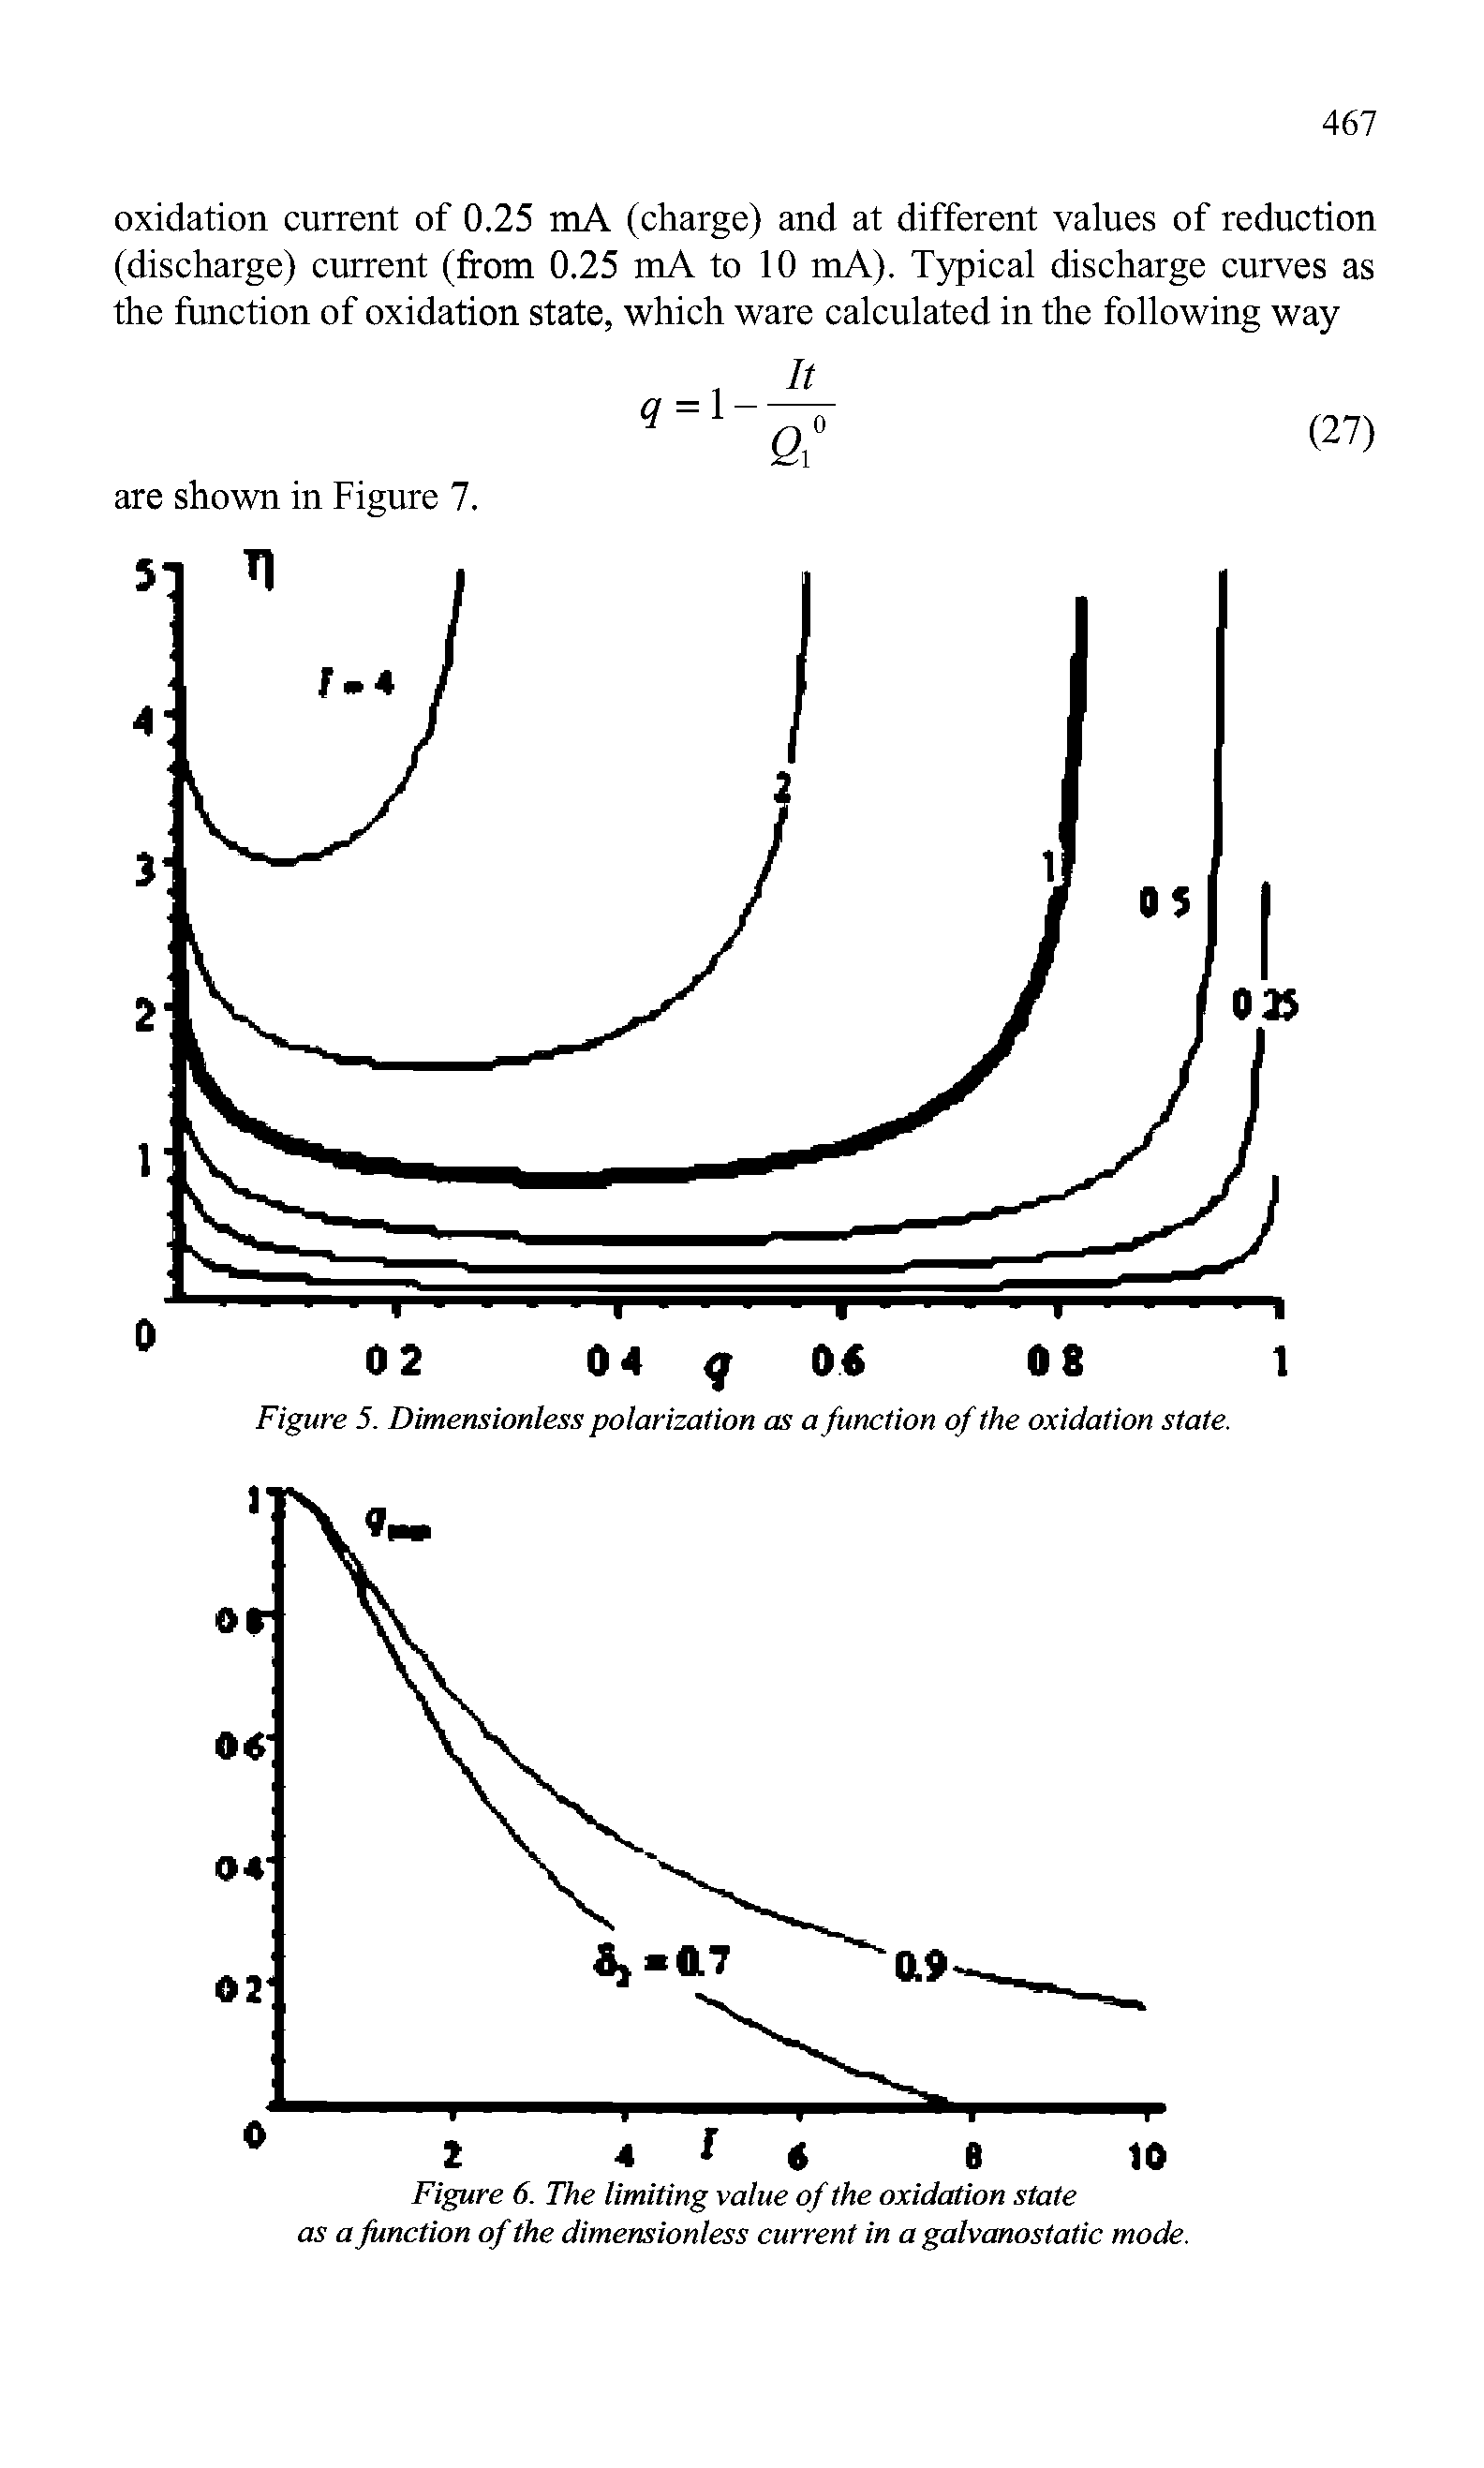 Figure 6. The limiting value of the oxidation state as a function of the dimensionless current in a galvanostatic mode.